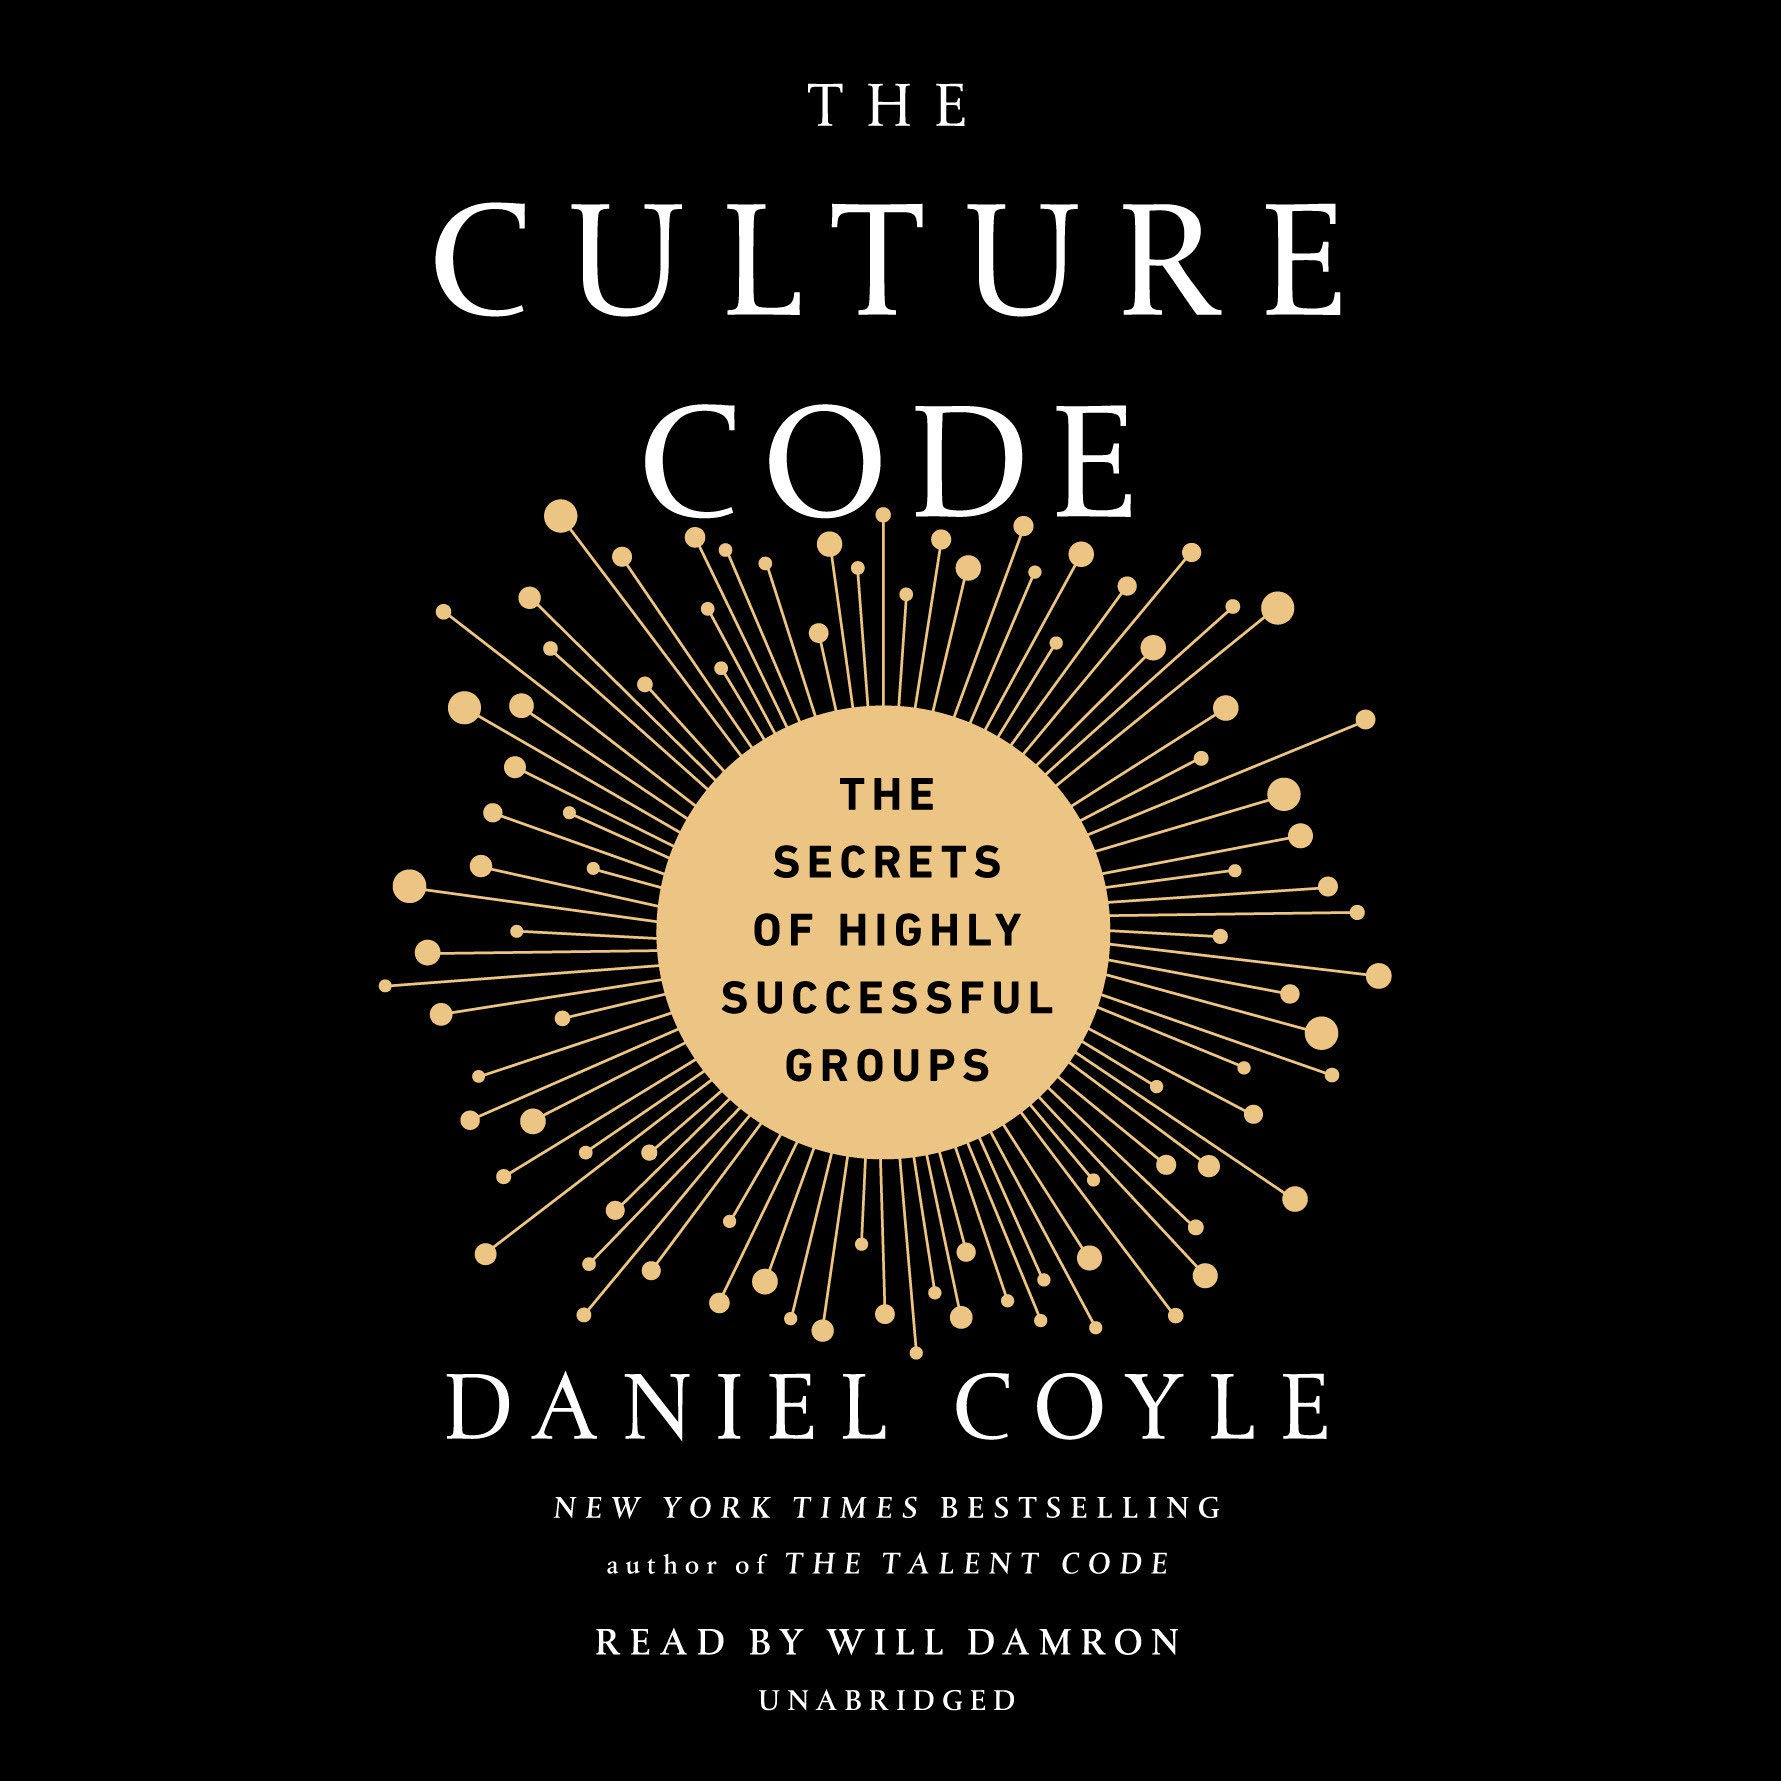 The book cover for The Culture Code.